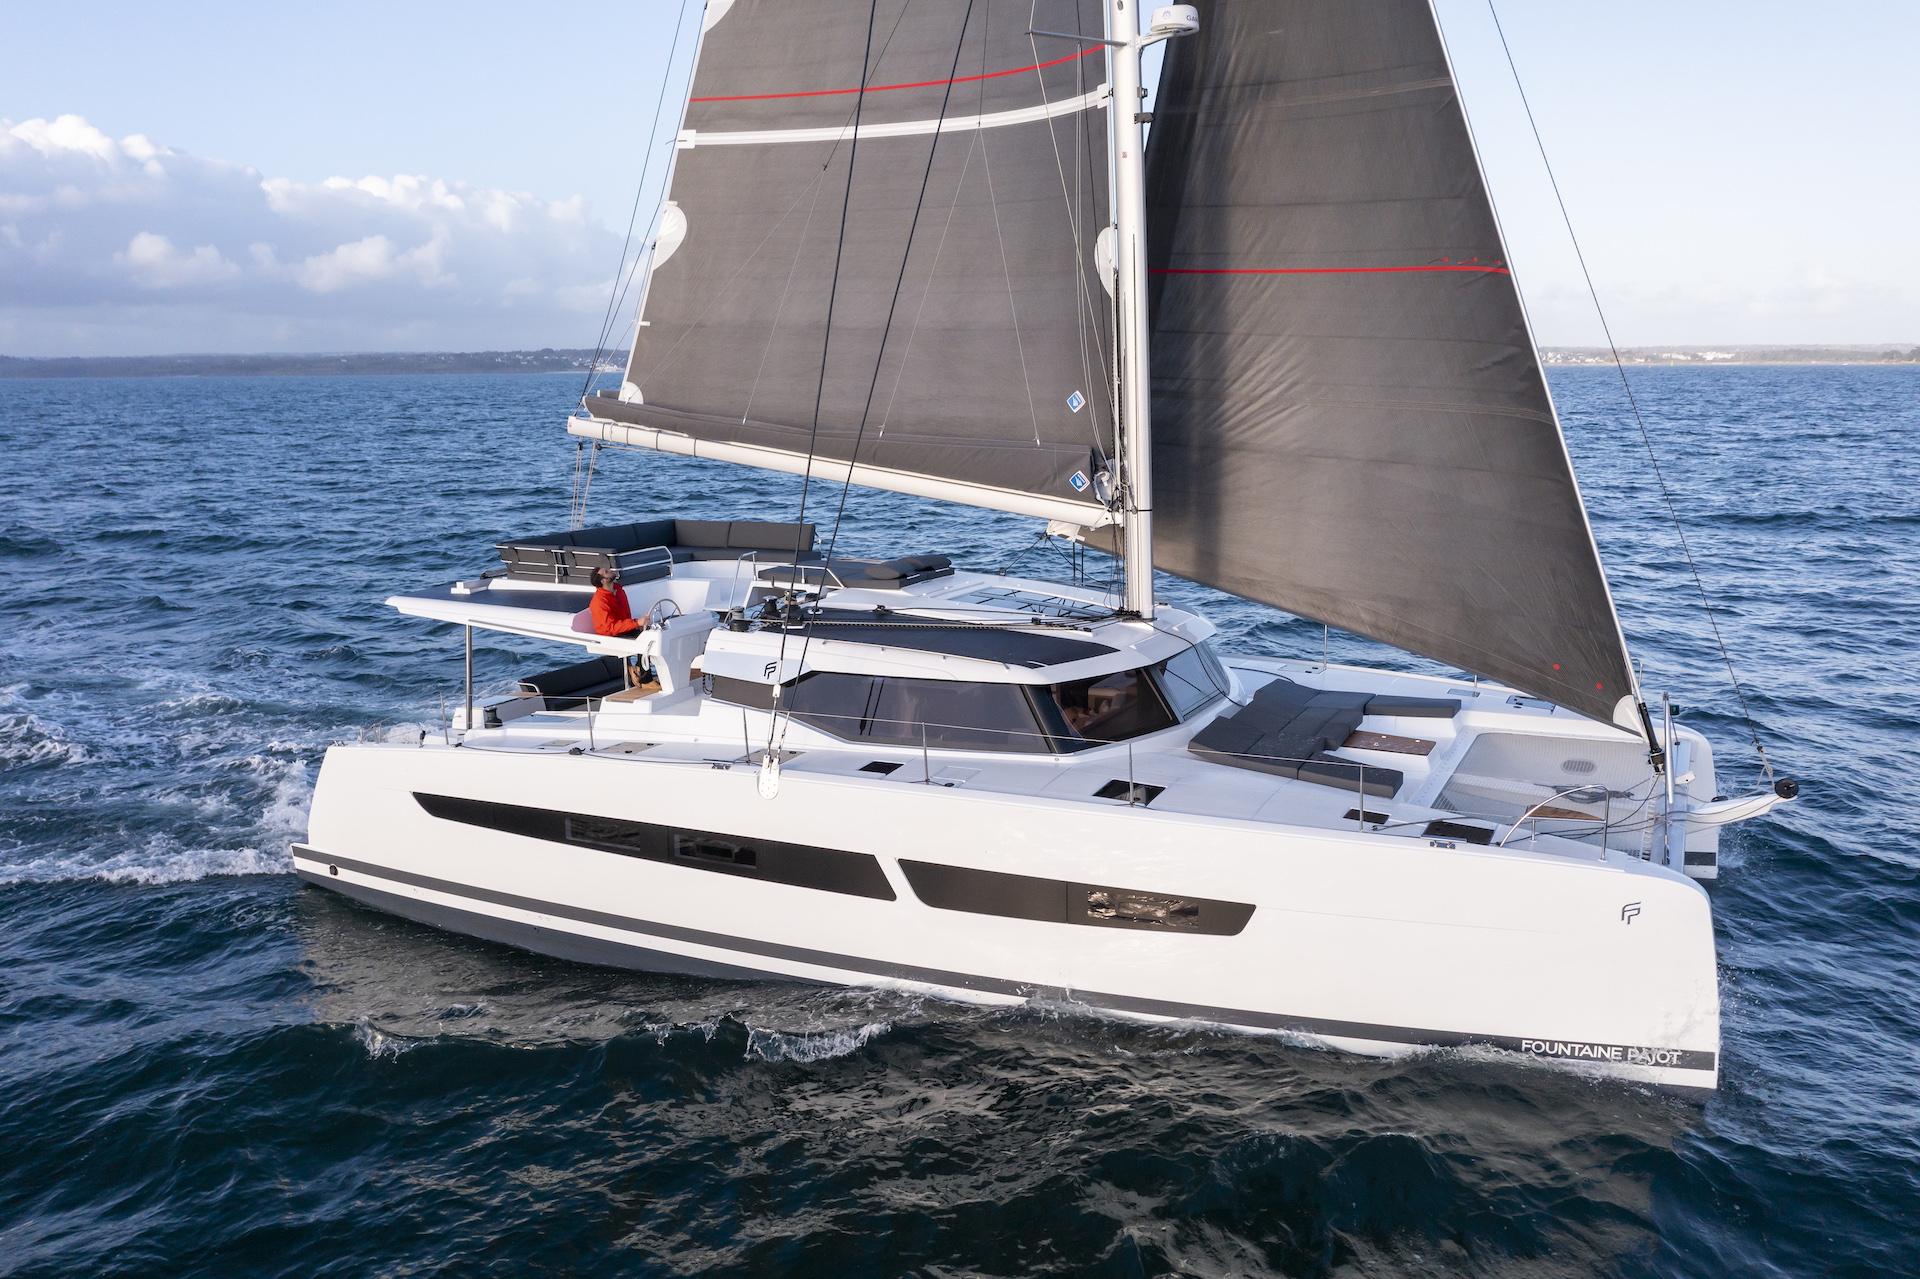 FOUTAINE PAJOT 2022 FP 51